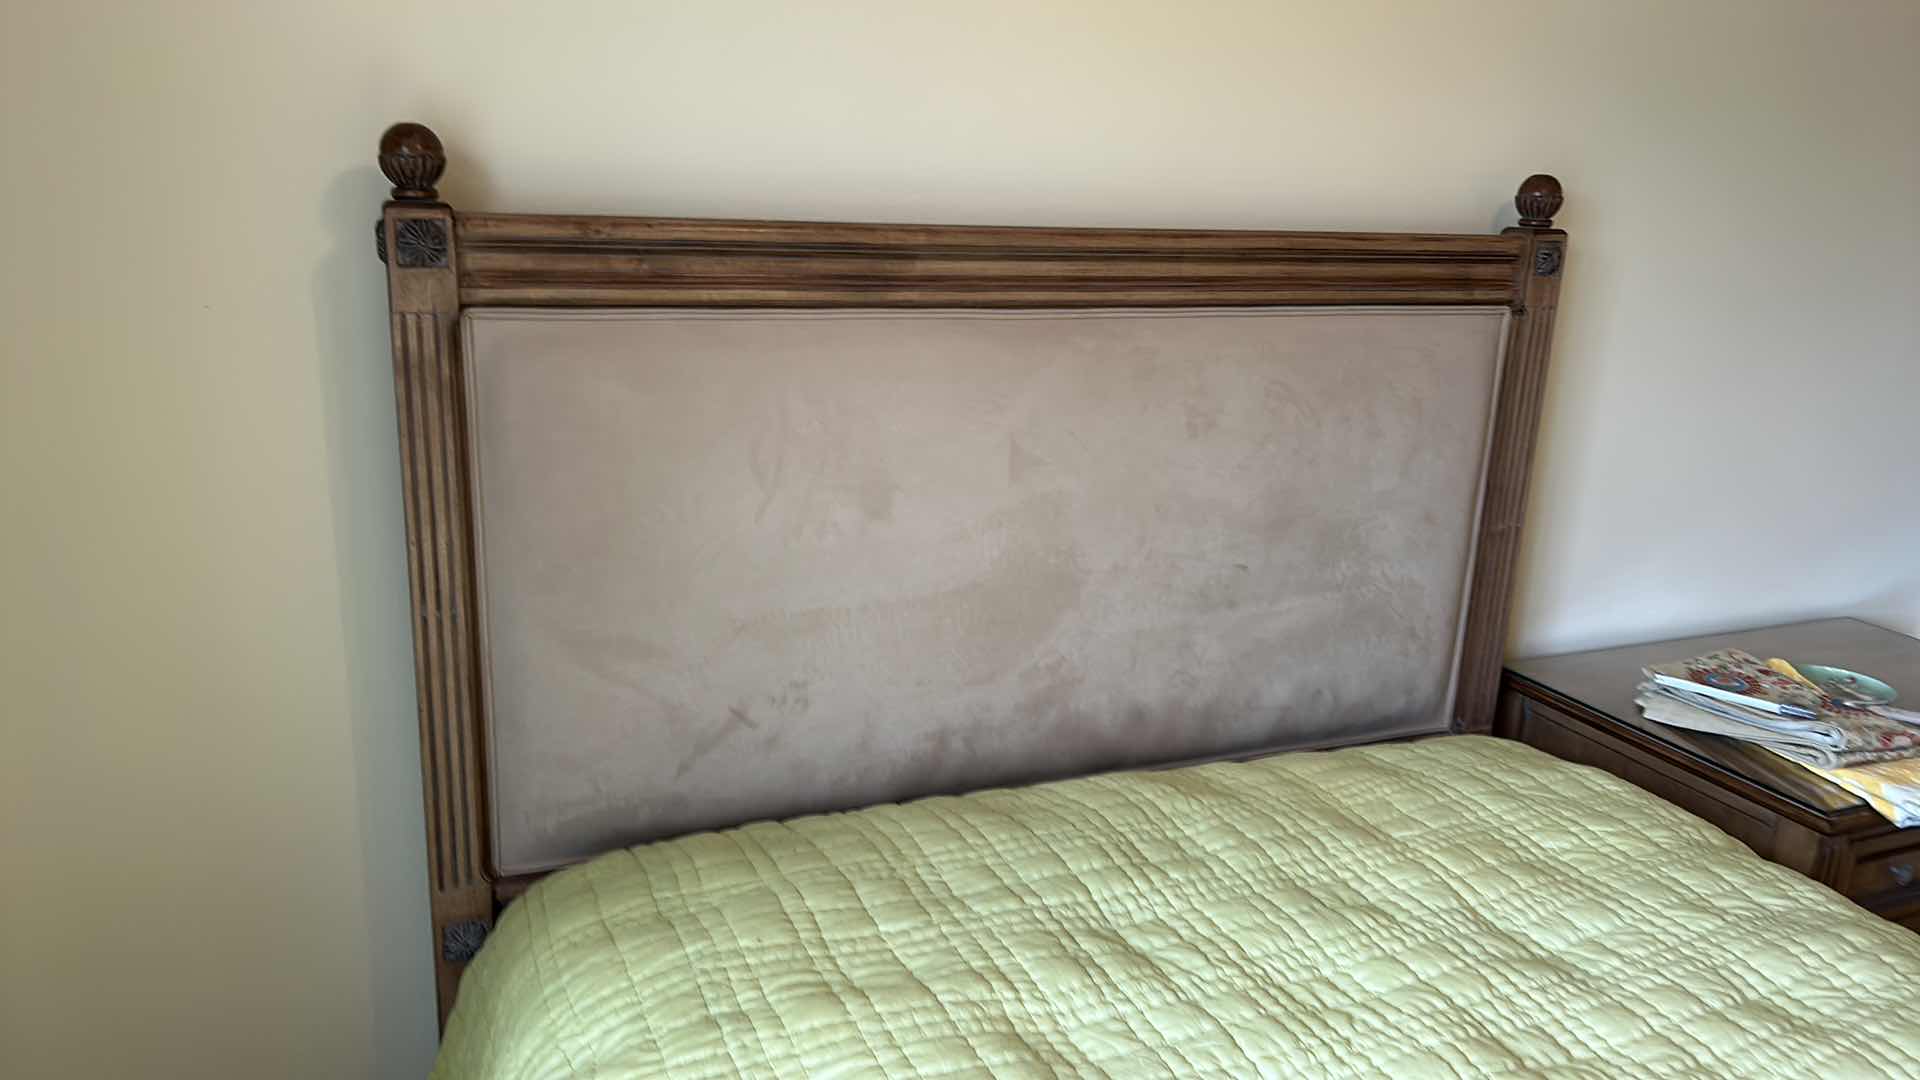 Photo 9 of WOOD UPHOLSTERED QUEEN HEADBOARD FOOTBOARD AND SIDEBOARD (MATTRESS AND BEDDING SOLD SEPARATELY) 65” x 87”